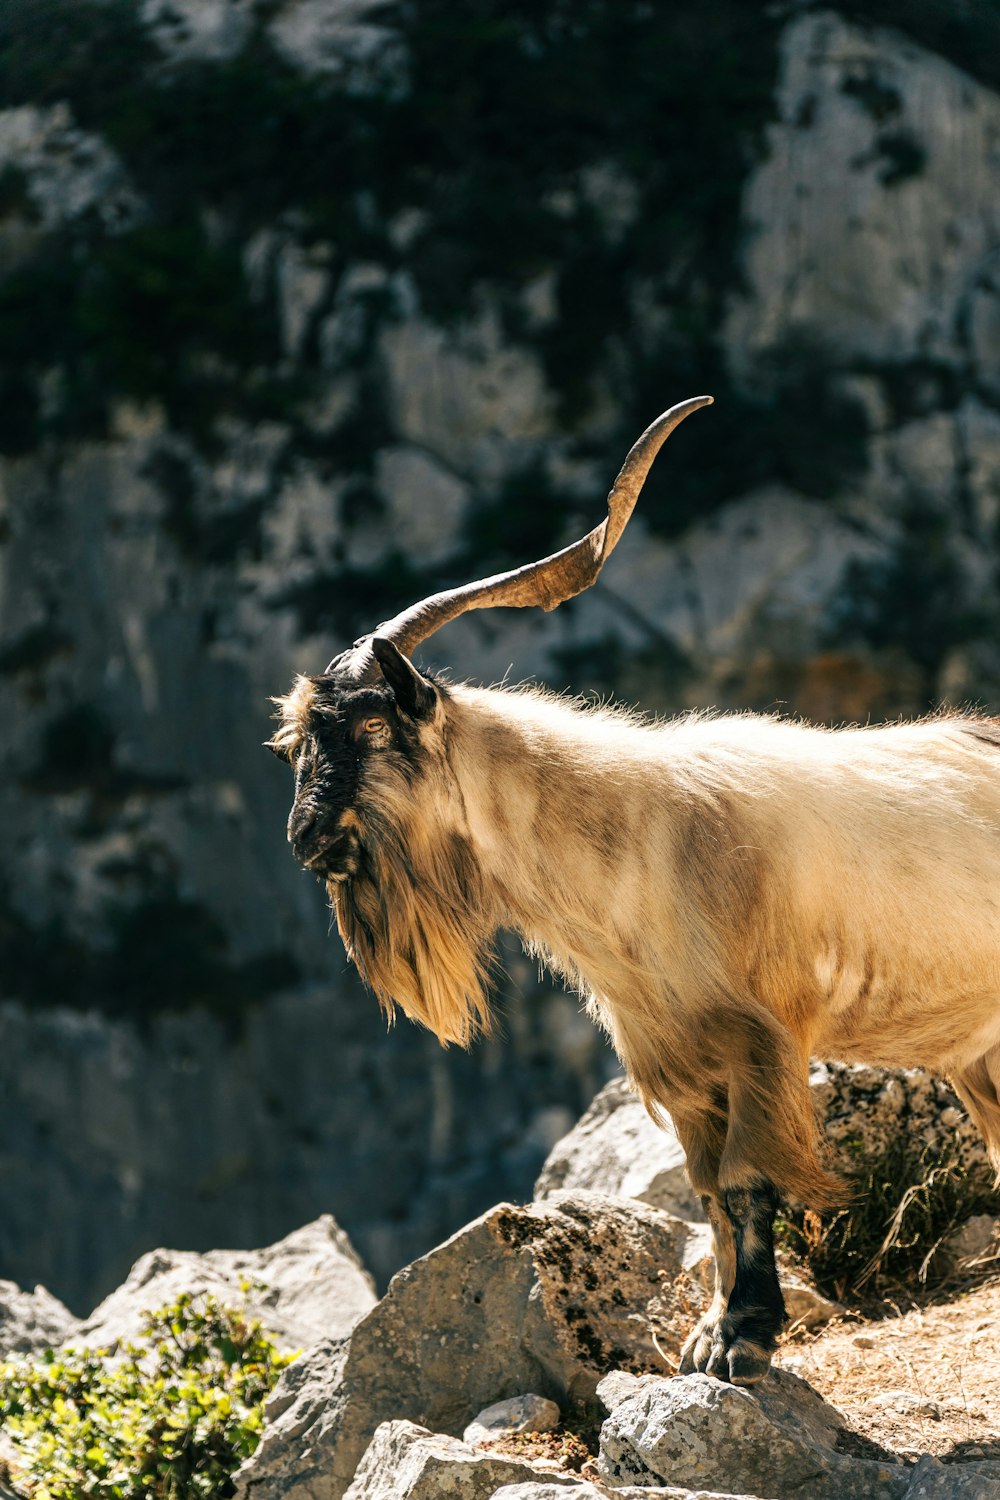 a goat with long horns standing on rocks